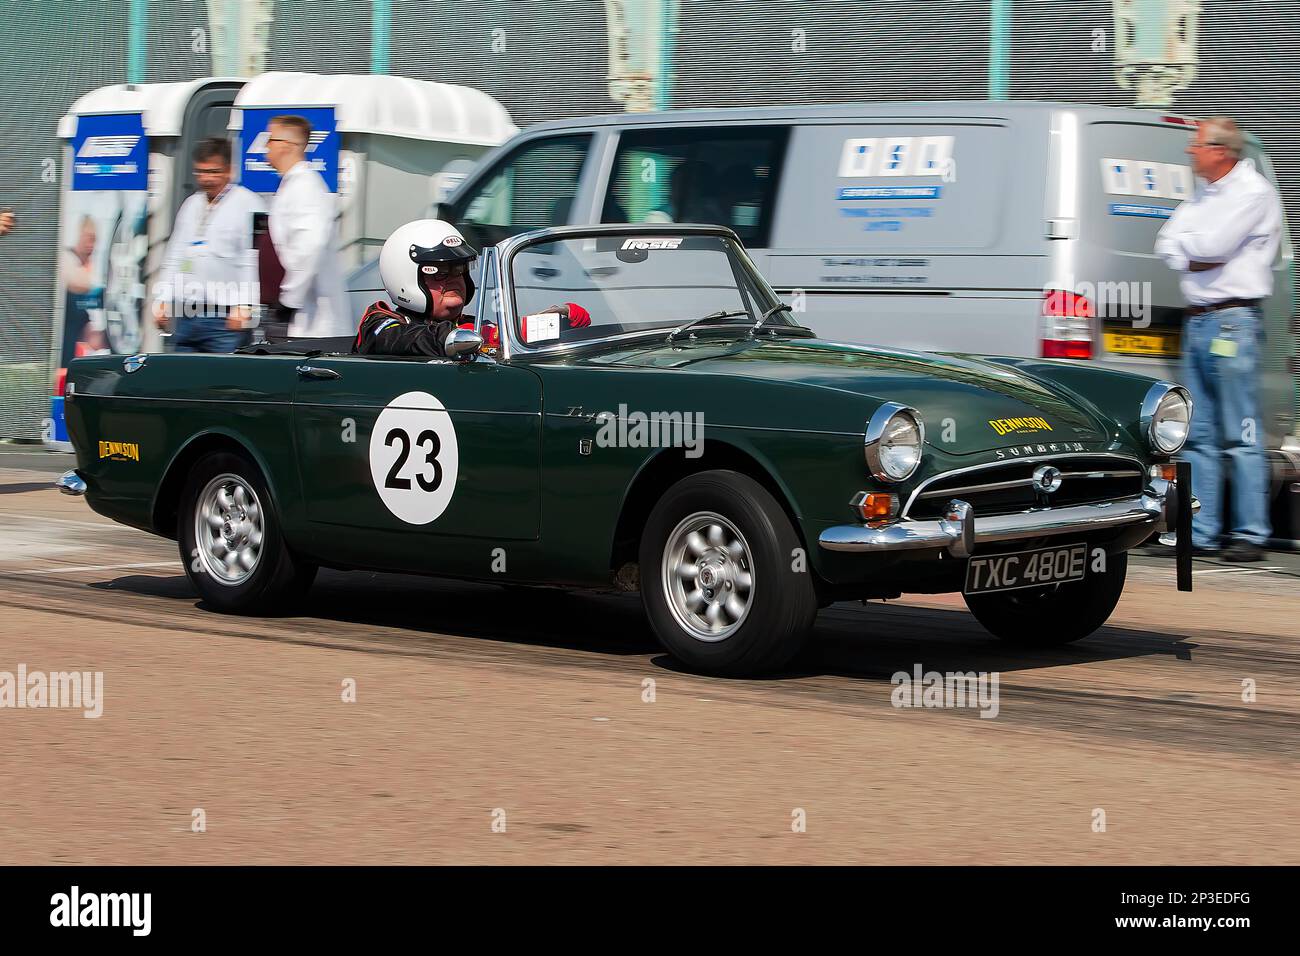 Andy Joicey driving a Sunbeam Tiger at The Brighton National Speed Trials 2017. This is the oldest motor racing event in the UK and is held in the south east coastal town of Brighton. Madeira drive is a road which runs along the seafront and is normal full of people explorer the beach, pier and local attractions. Today it is turned in to a 1/4 time trial course. 2nd September 2017. Stock Photo